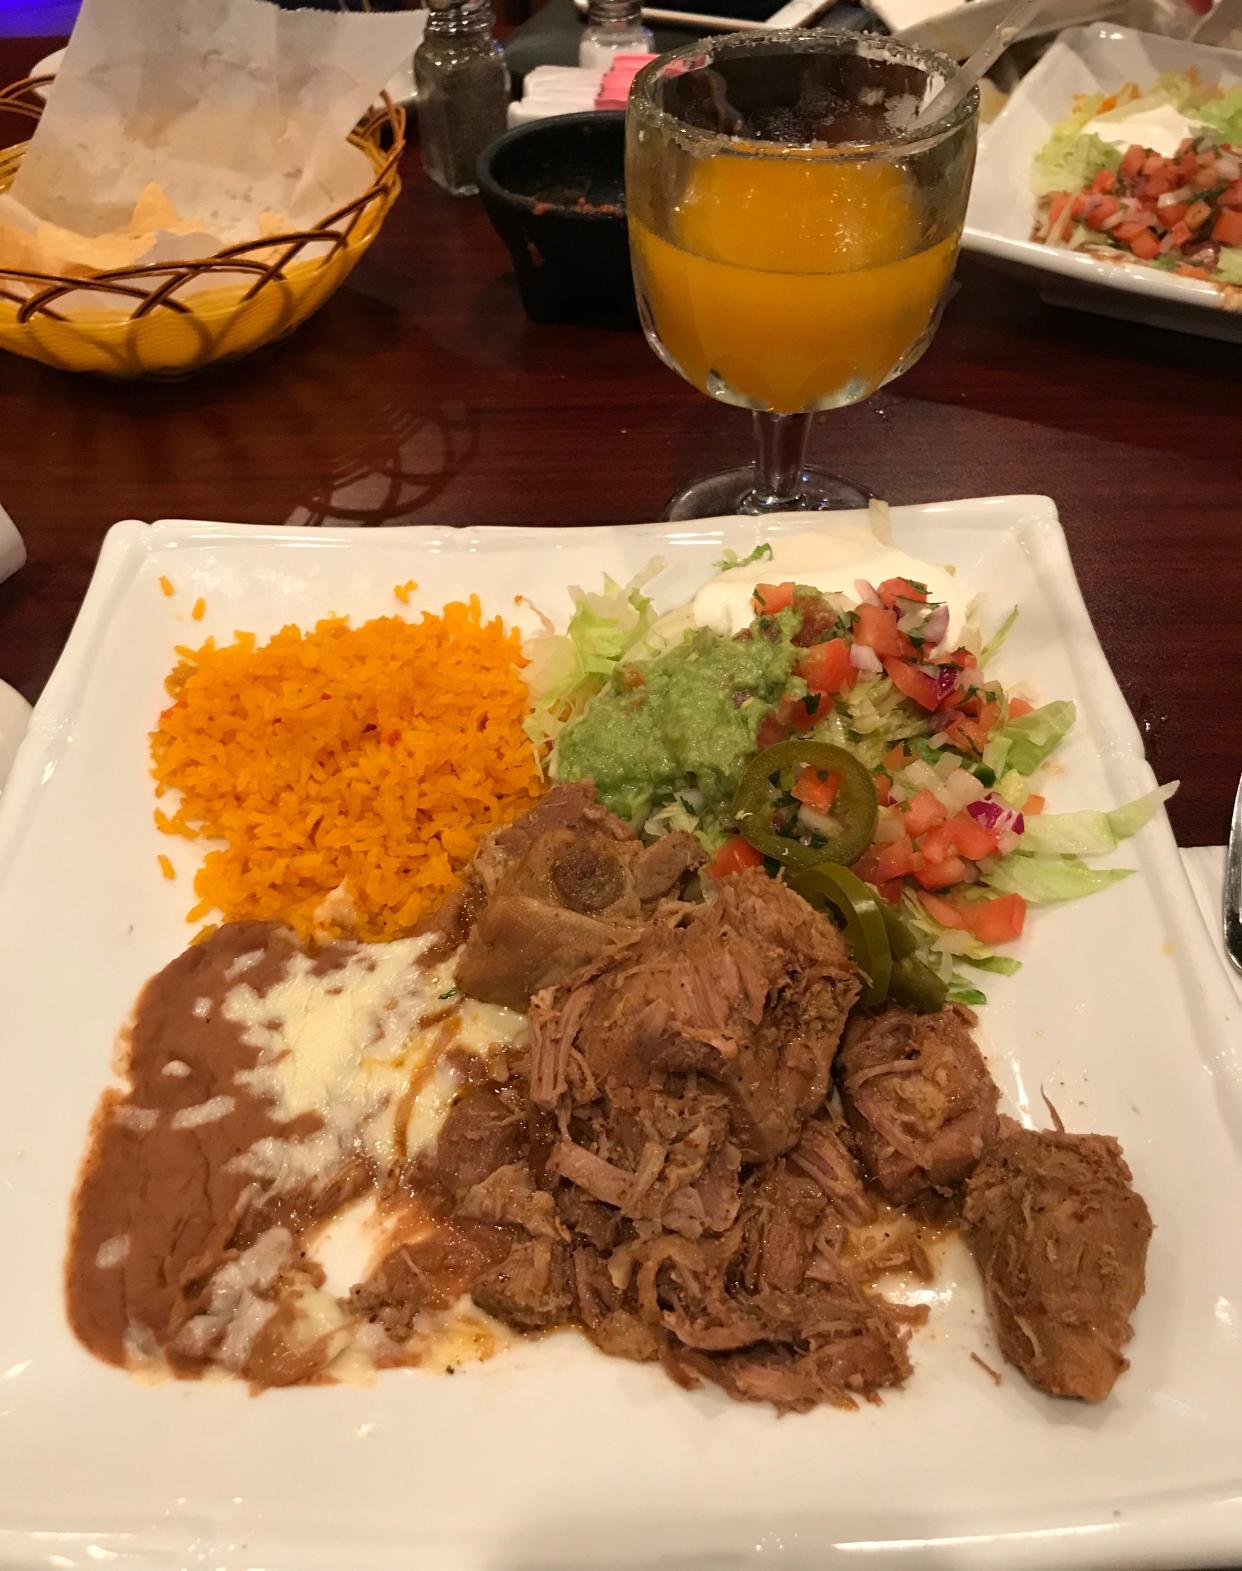 The carnitas plate and the mango margarita from Blue Margaritas Bar and Grill in Washington.